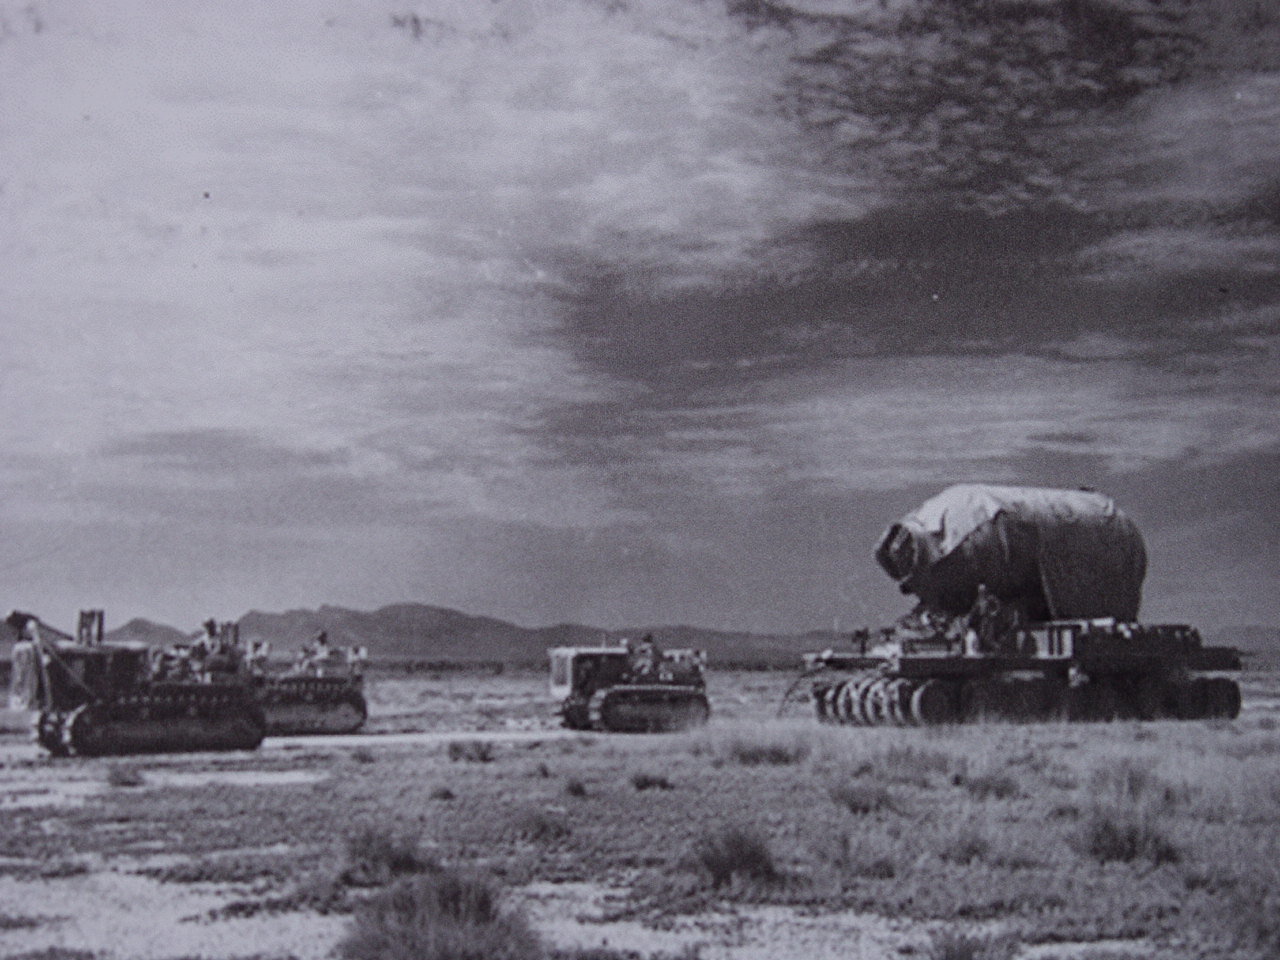 In this historic photo, military personnel are seen moving “Jumbo” to Trinity Site. One of the concerns of the scientists who built the “Gadget” nuclear device that was detonated at Trinity Site in 1945, was that the bomb might not actually go off. In order to preserve the 13 pounds of plutonium in case of failed detonation, an 80 ton steel vessel named “Jumbo” was built with the intention of imploding the device inside. The $12 million dollar vessel was never used for that purpose because by the time the test was nearly ready, scientists were confident that it would work. Instead, “Jumbo” was suspended on a steel tower 800 meters from ground zero. The tower was completely destroyed in the explosion, but “Jumbo” remained very much intact. Later, the military tried to destroy it using eight 500 pound bombs, but only succeeded in blowing the ends off of it. What remains can still be seen at Trinity Site today